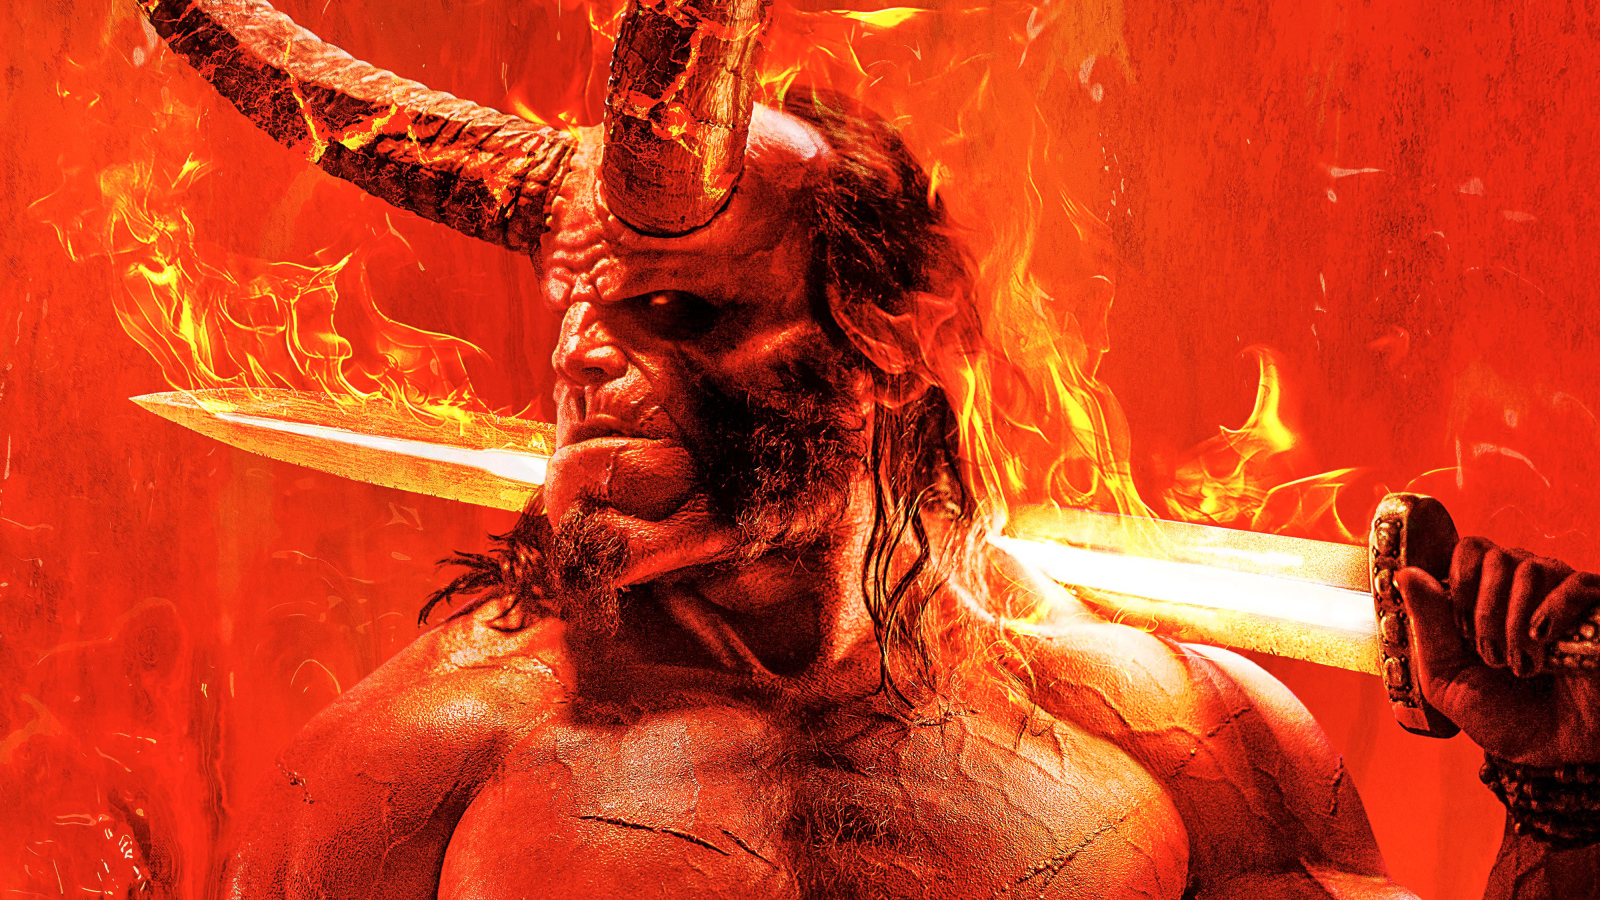 Poster of the new film Hellboy 2. The Revival of the Bloody Queen, 2019